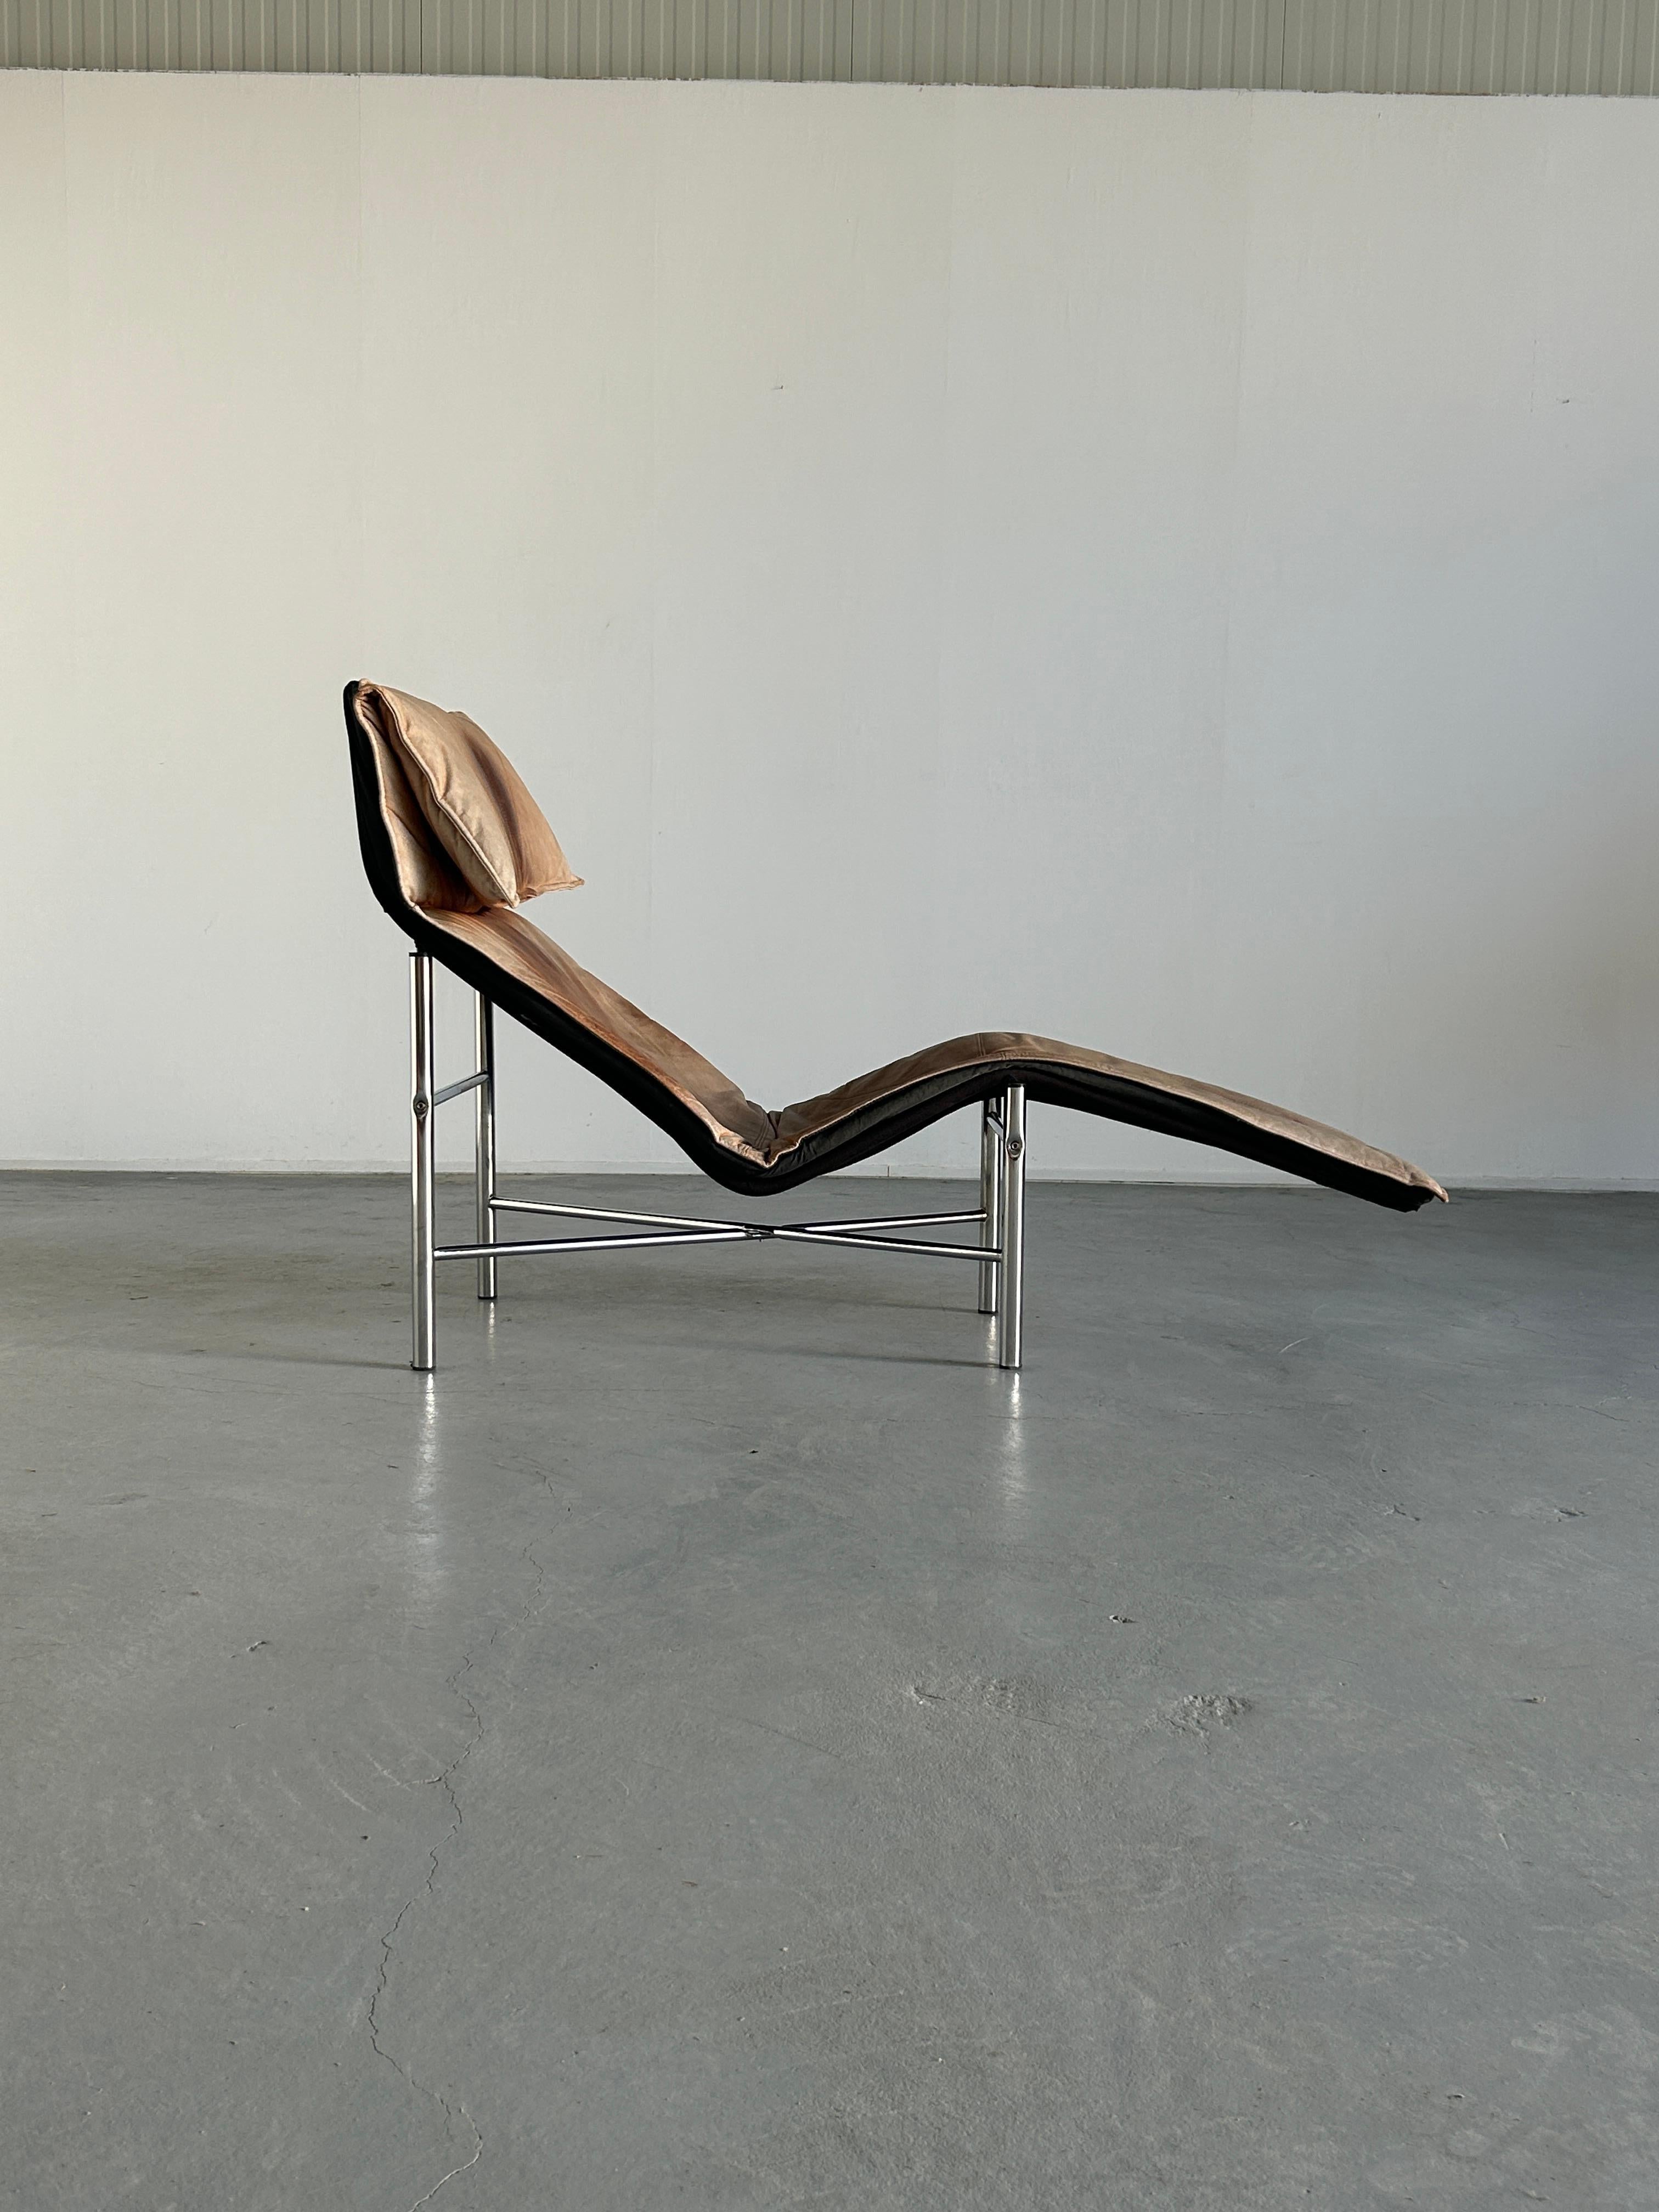 Swedish Vintage Leather Chaise Longue in Cognac Leather by Tord Bjorklund for Ikea, 1980